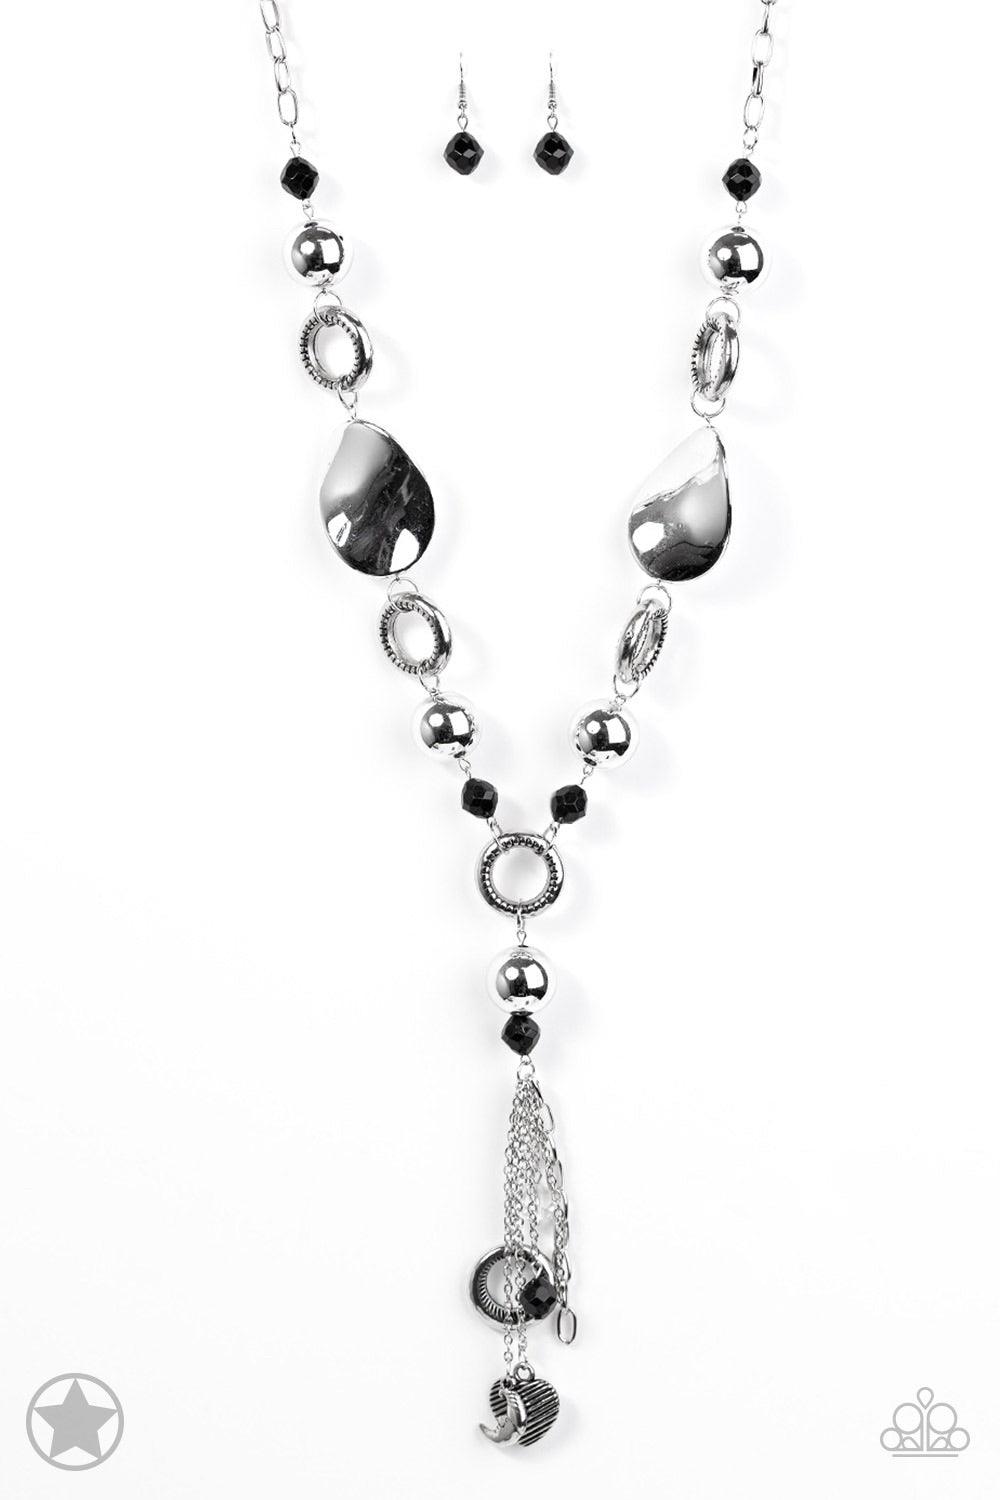 Paparazzi Accessories Total Eclipse Of The Heart - Silver Long chain of black crystalized beads, curved plates of silver with a pearly finish, and chunky silver rings lead down to a tassel of chains and charms, including a crescent moon and a heart. Jewel